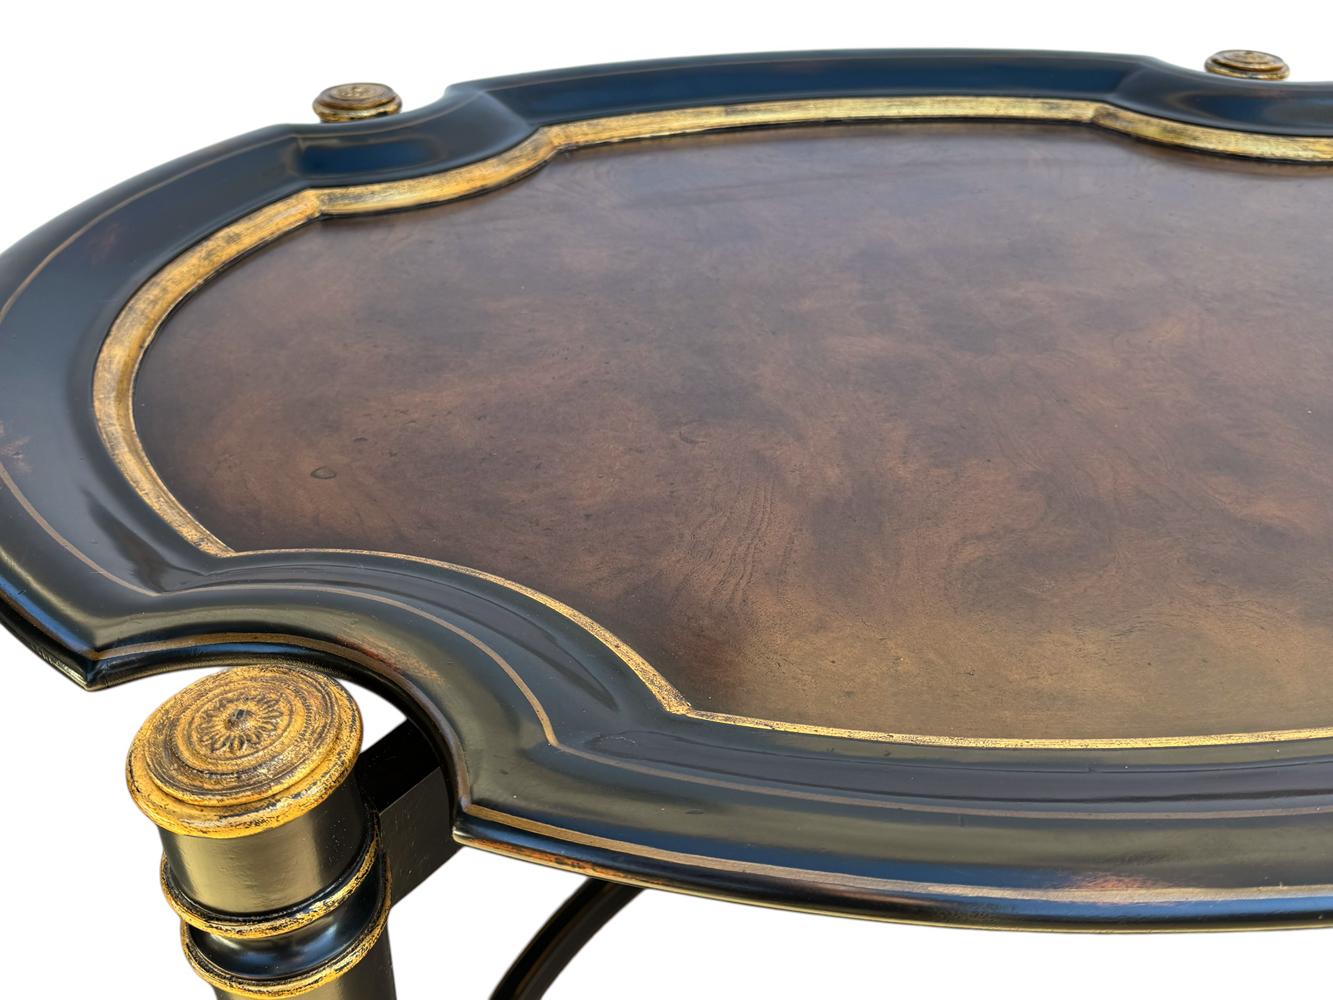 Hollywood Regency Burl Wood with Gold Trim Oval Cocktail Table by Maitland Smith In Good Condition For Sale In Philadelphia, PA